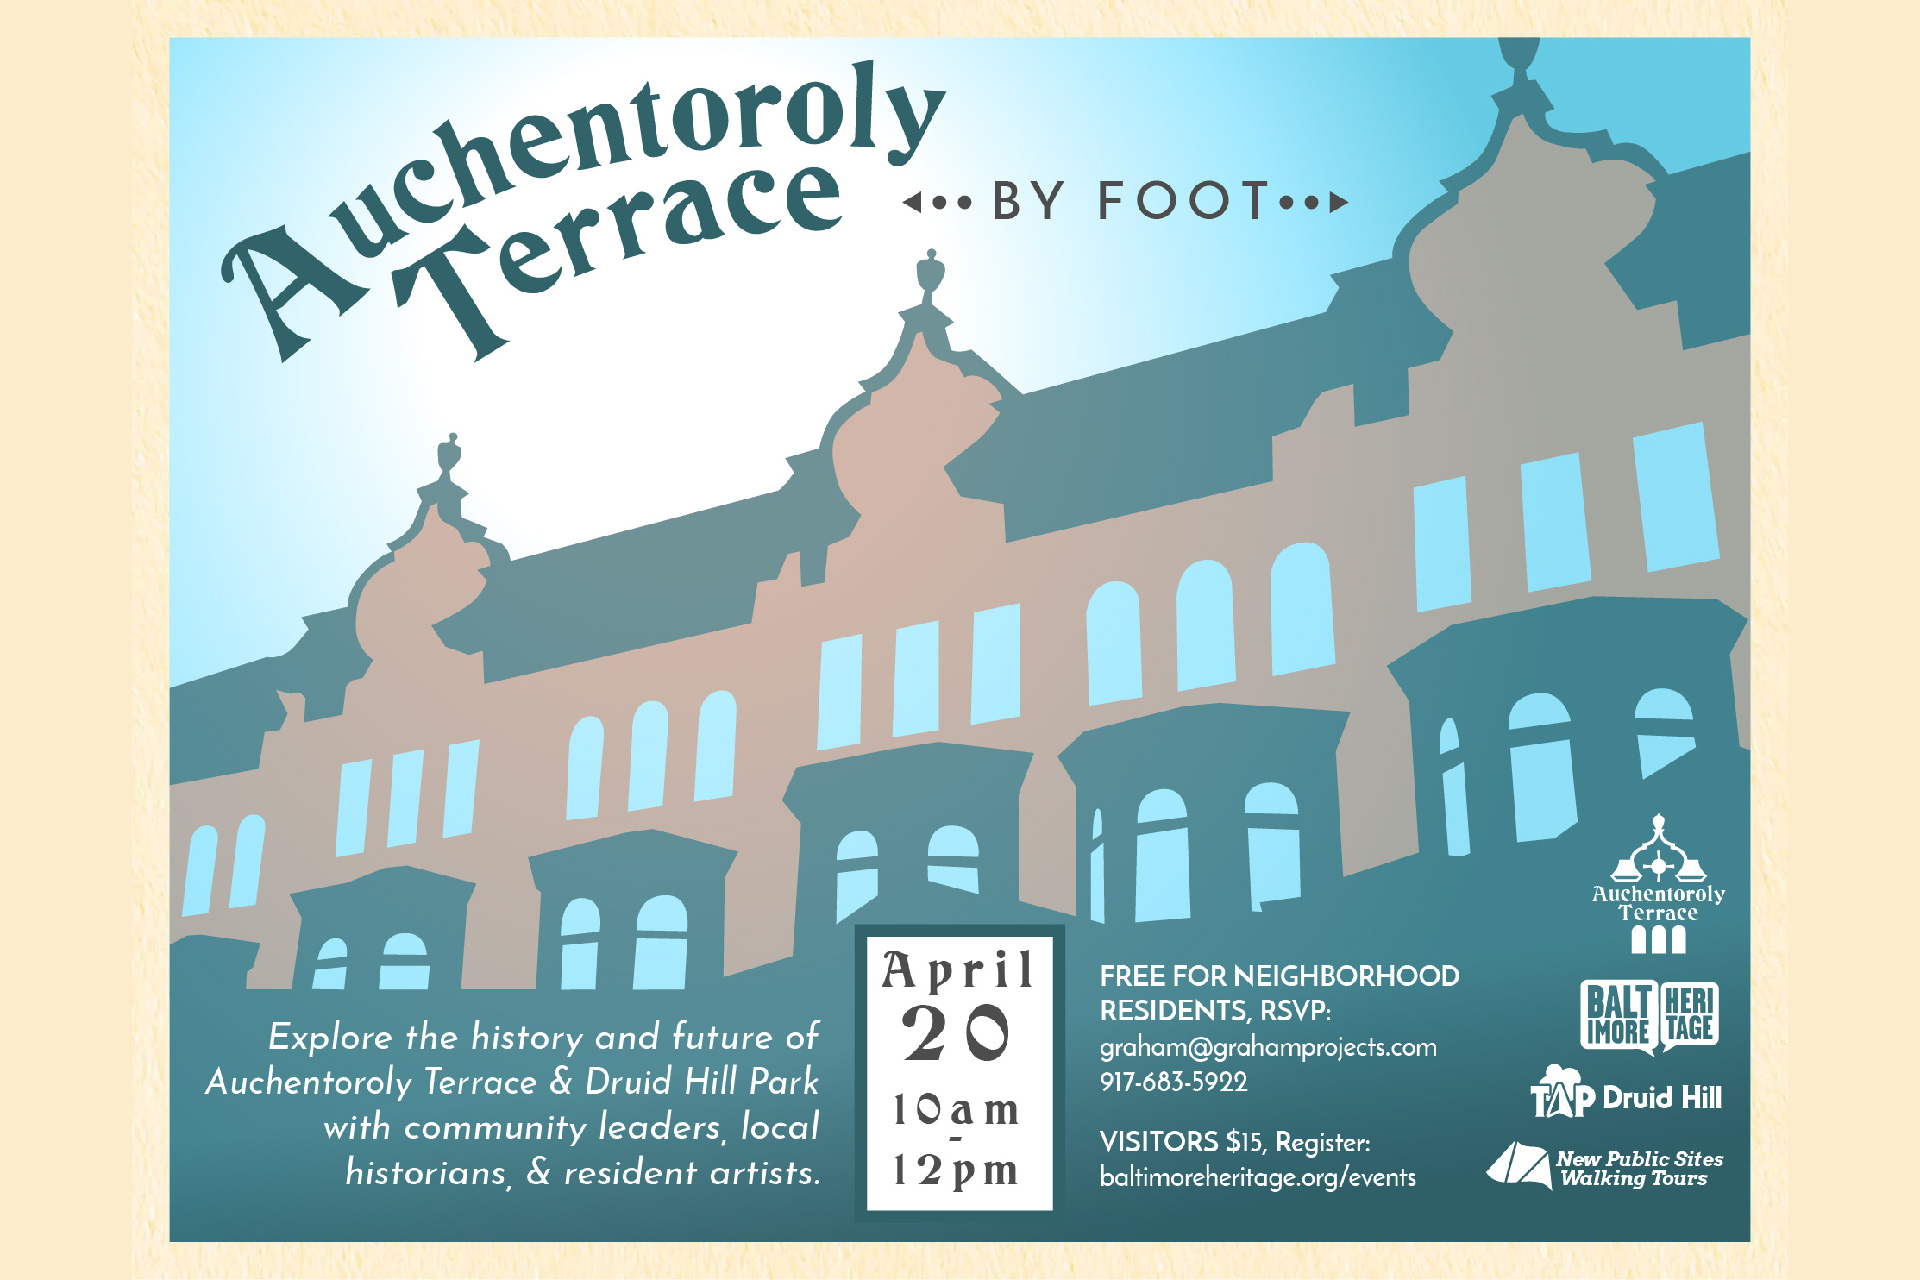 Auchentoroly Terrace by Foot flyer